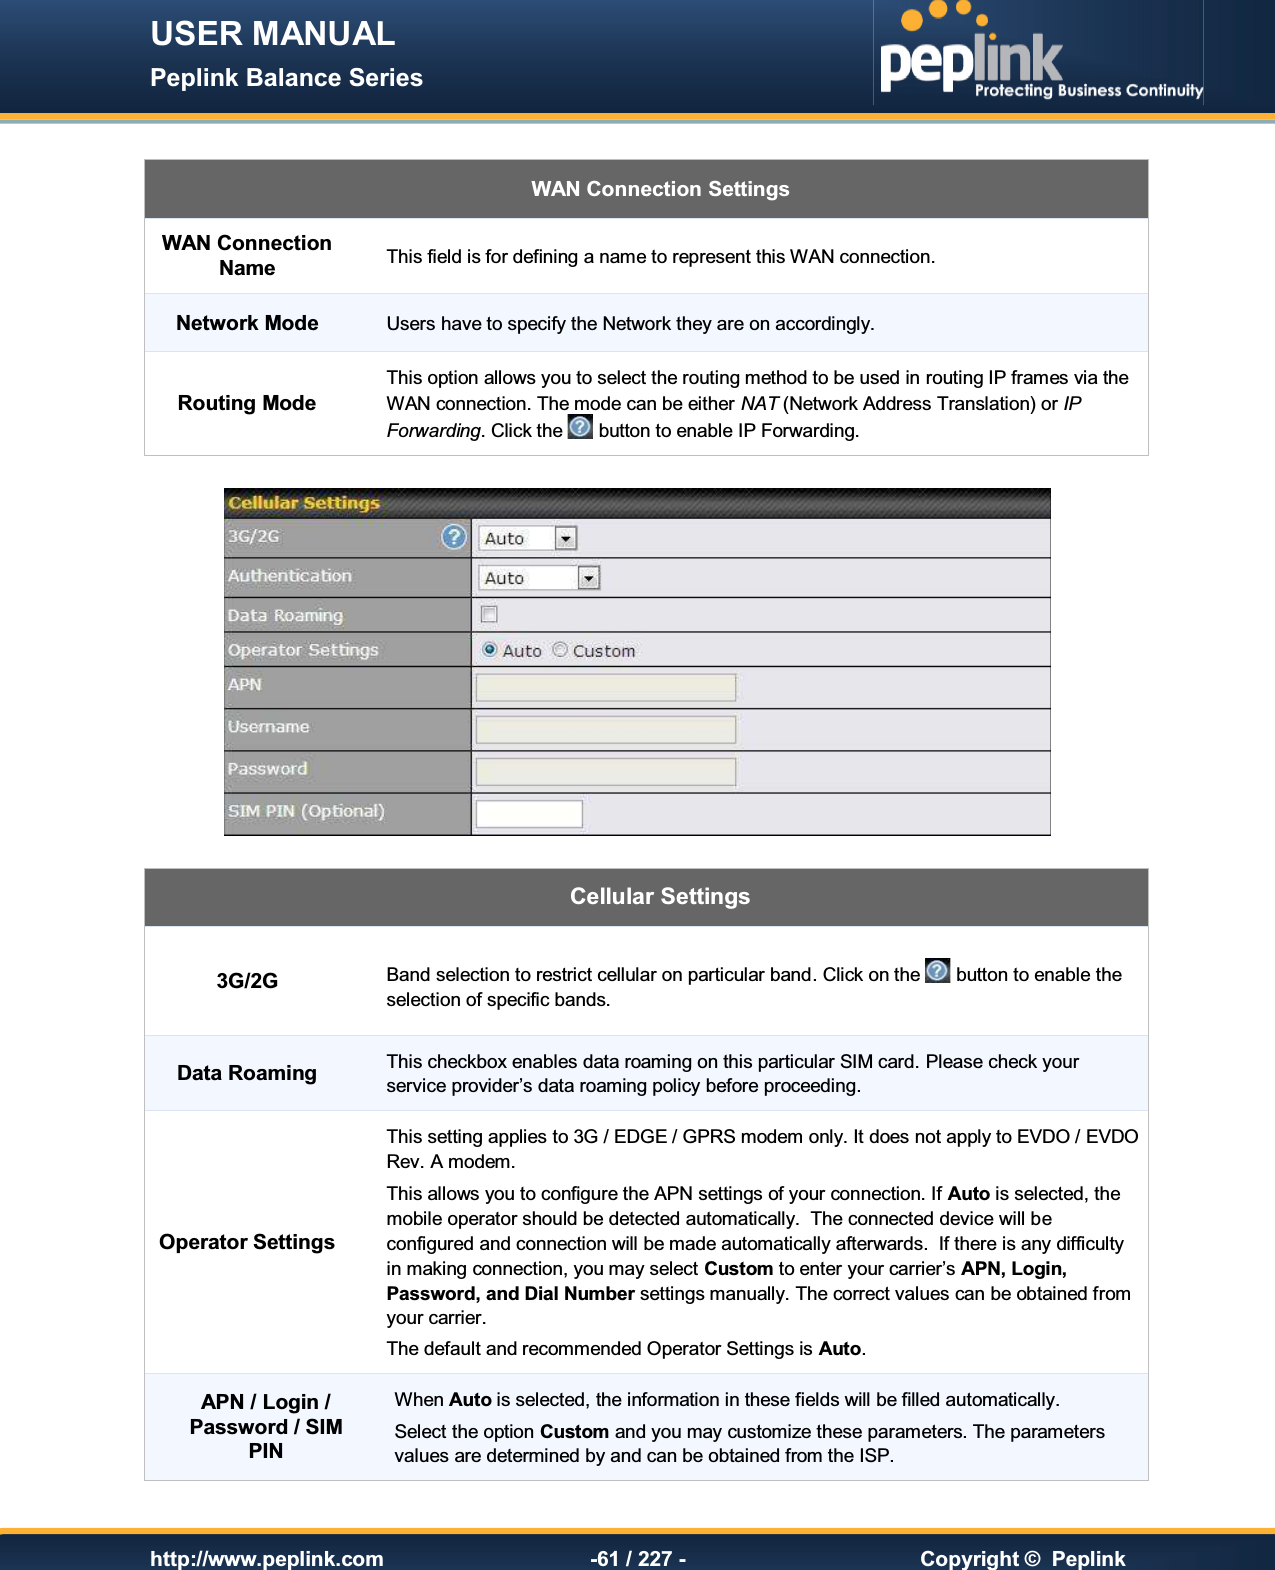 USER MANUAL Peplink Balance Series   http://www.peplink.com -61 / 227 -  Copyright ©  Peplink  WAN Connection Settings WAN Connection Name This field is for defining a name to represent this WAN connection. Network Mode Users have to specify the Network they are on accordingly. Routing Mode This option allows you to select the routing method to be used in routing IP frames via the WAN connection. The mode can be either NAT (Network Address Translation) or IP Forwarding. Click the   button to enable IP Forwarding.    Cellular Settings 3G/2G  Band selection to restrict cellular on particular band. Click on the   button to enable the selection of specific bands. Data Roaming This checkbox enables data roaming on this particular SIM card. Please check your service provider’s data roaming policy before proceeding. Operator Settings This setting applies to 3G / EDGE / GPRS modem only. It does not apply to EVDO / EVDO Rev. A modem. This allows you to configure the APN settings of your connection. If Auto is selected, the mobile operator should be detected automatically.  The connected device will be configured and connection will be made automatically afterwards.  If there is any difficulty in making connection, you may select Custom to enter your carrier’s APN, Login, Password, and Dial Number settings manually. The correct values can be obtained from your carrier.  The default and recommended Operator Settings is Auto. APN / Login / Password / SIM PIN When Auto is selected, the information in these fields will be filled automatically. Select the option Custom and you may customize these parameters. The parameters values are determined by and can be obtained from the ISP. 